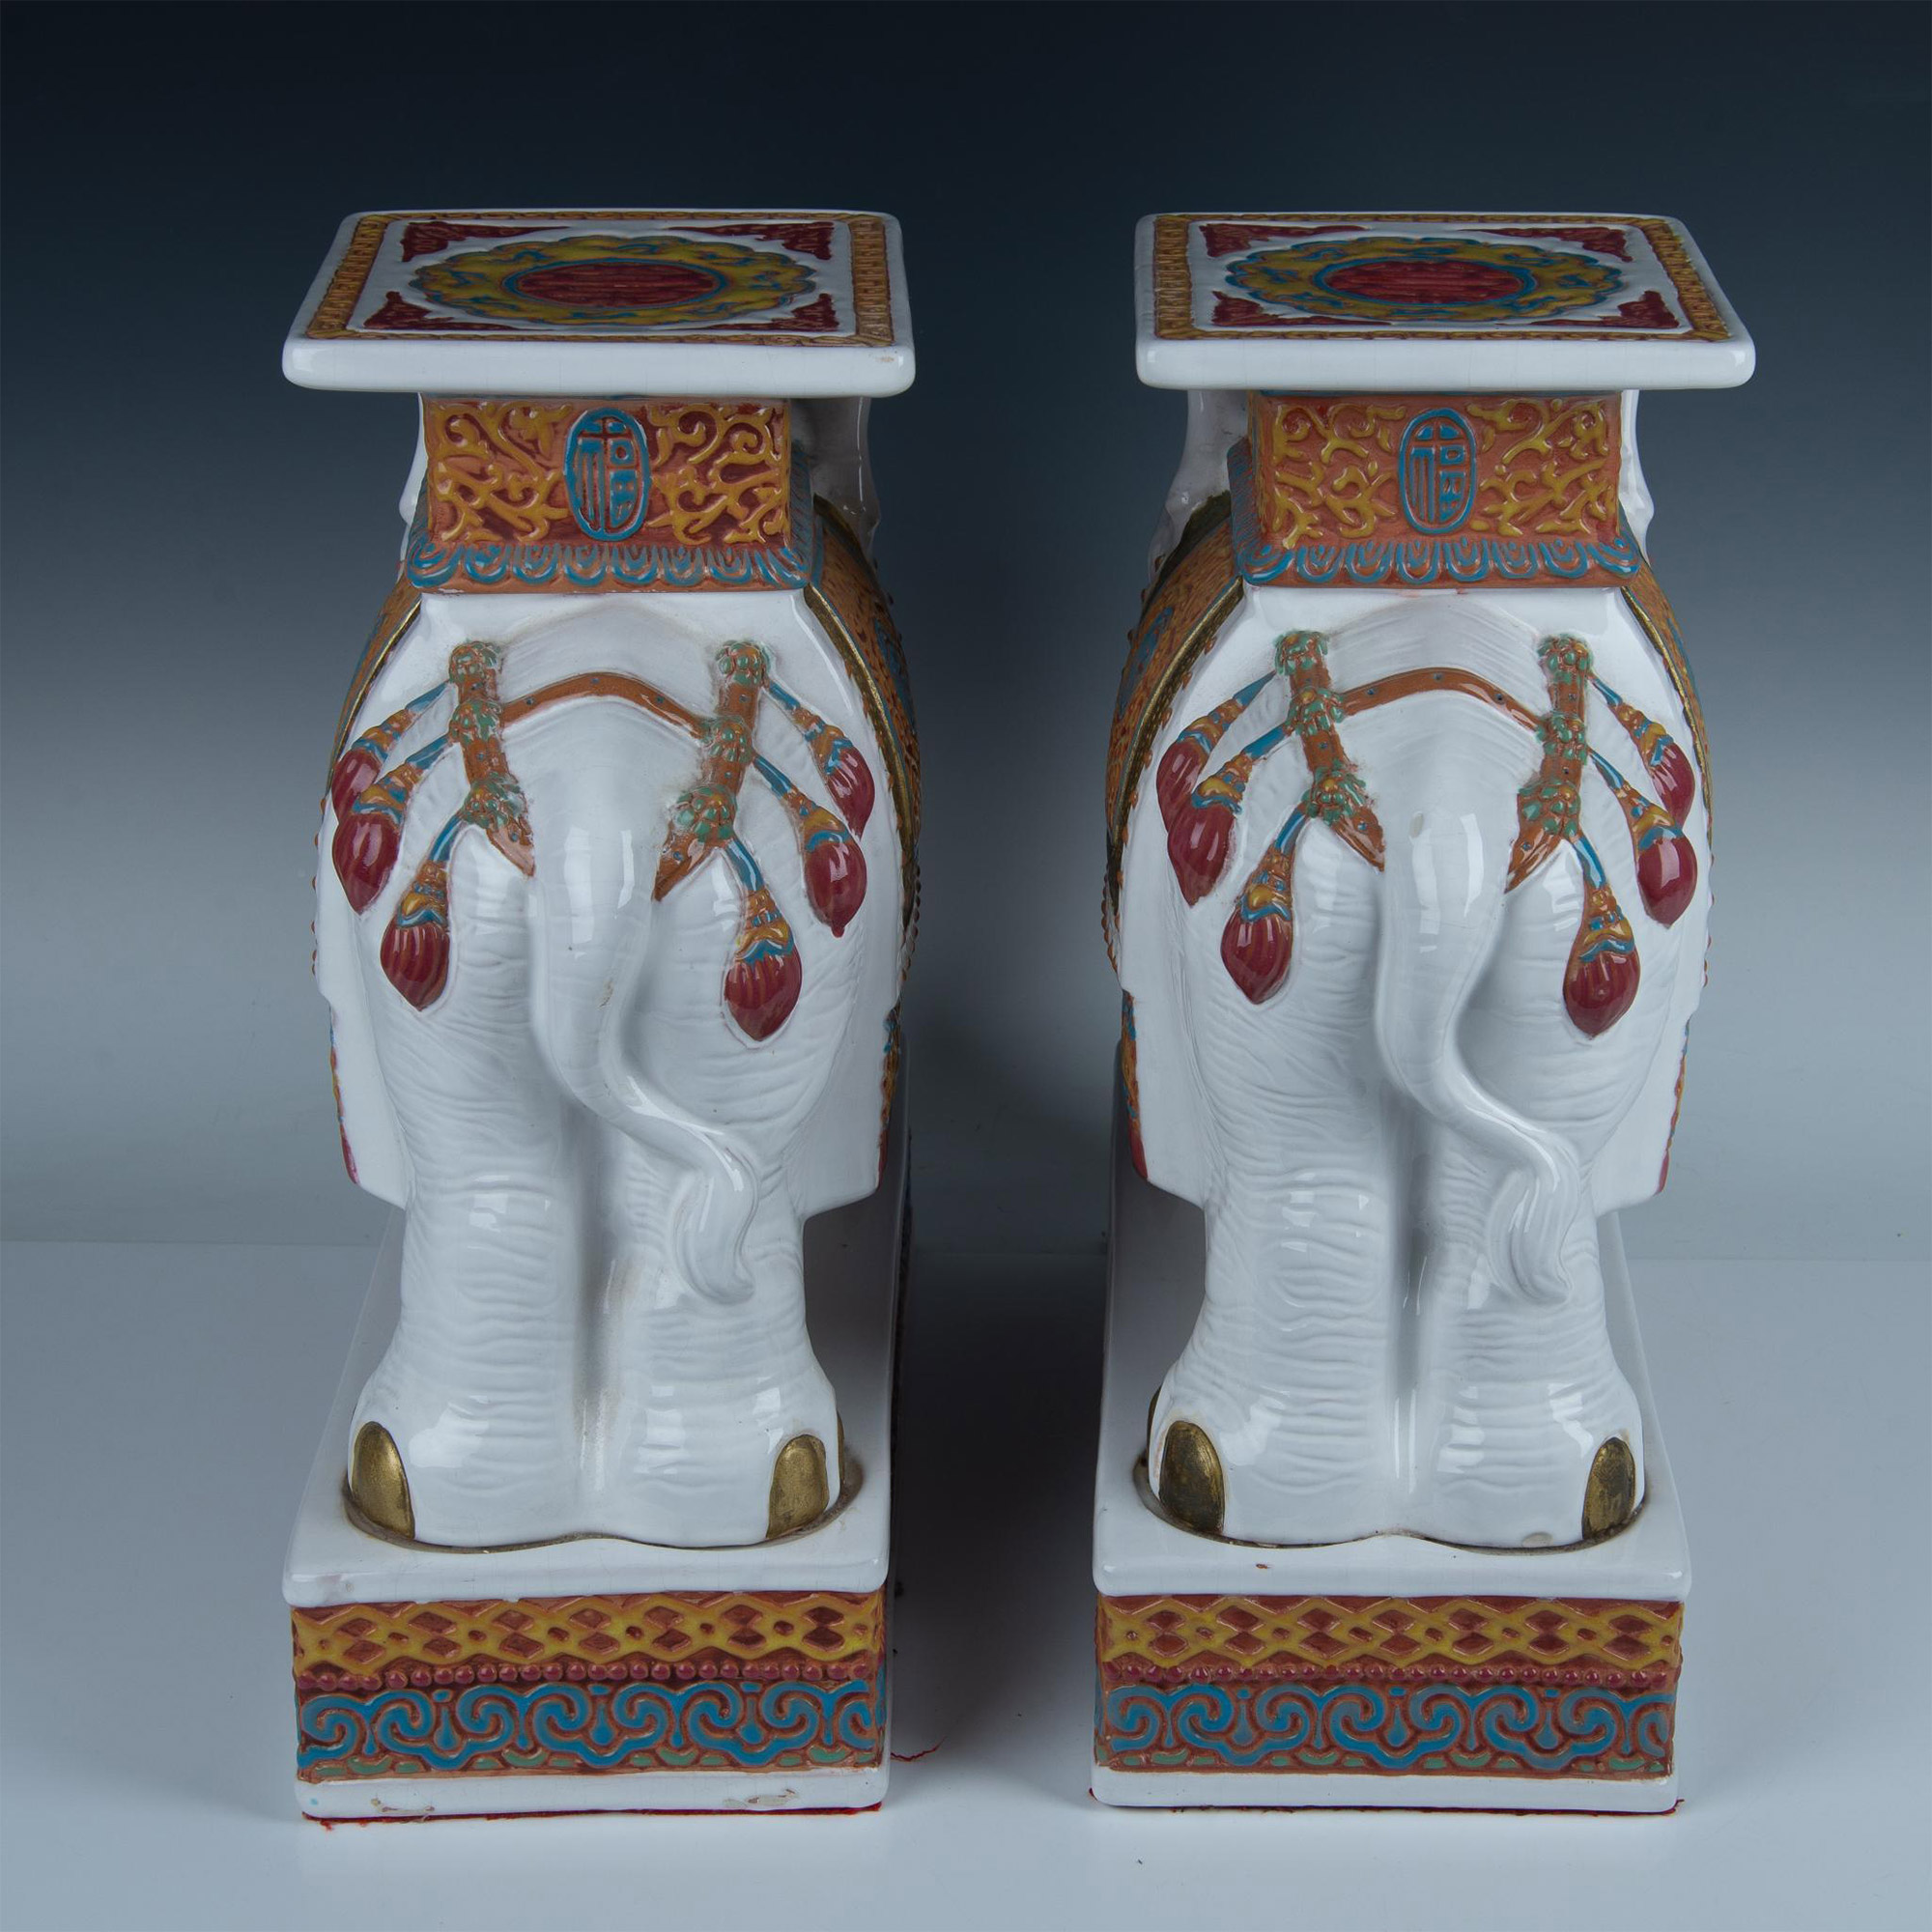 Pair of Vintage Ceramic Indian Elephant Plant Stands - Image 3 of 5